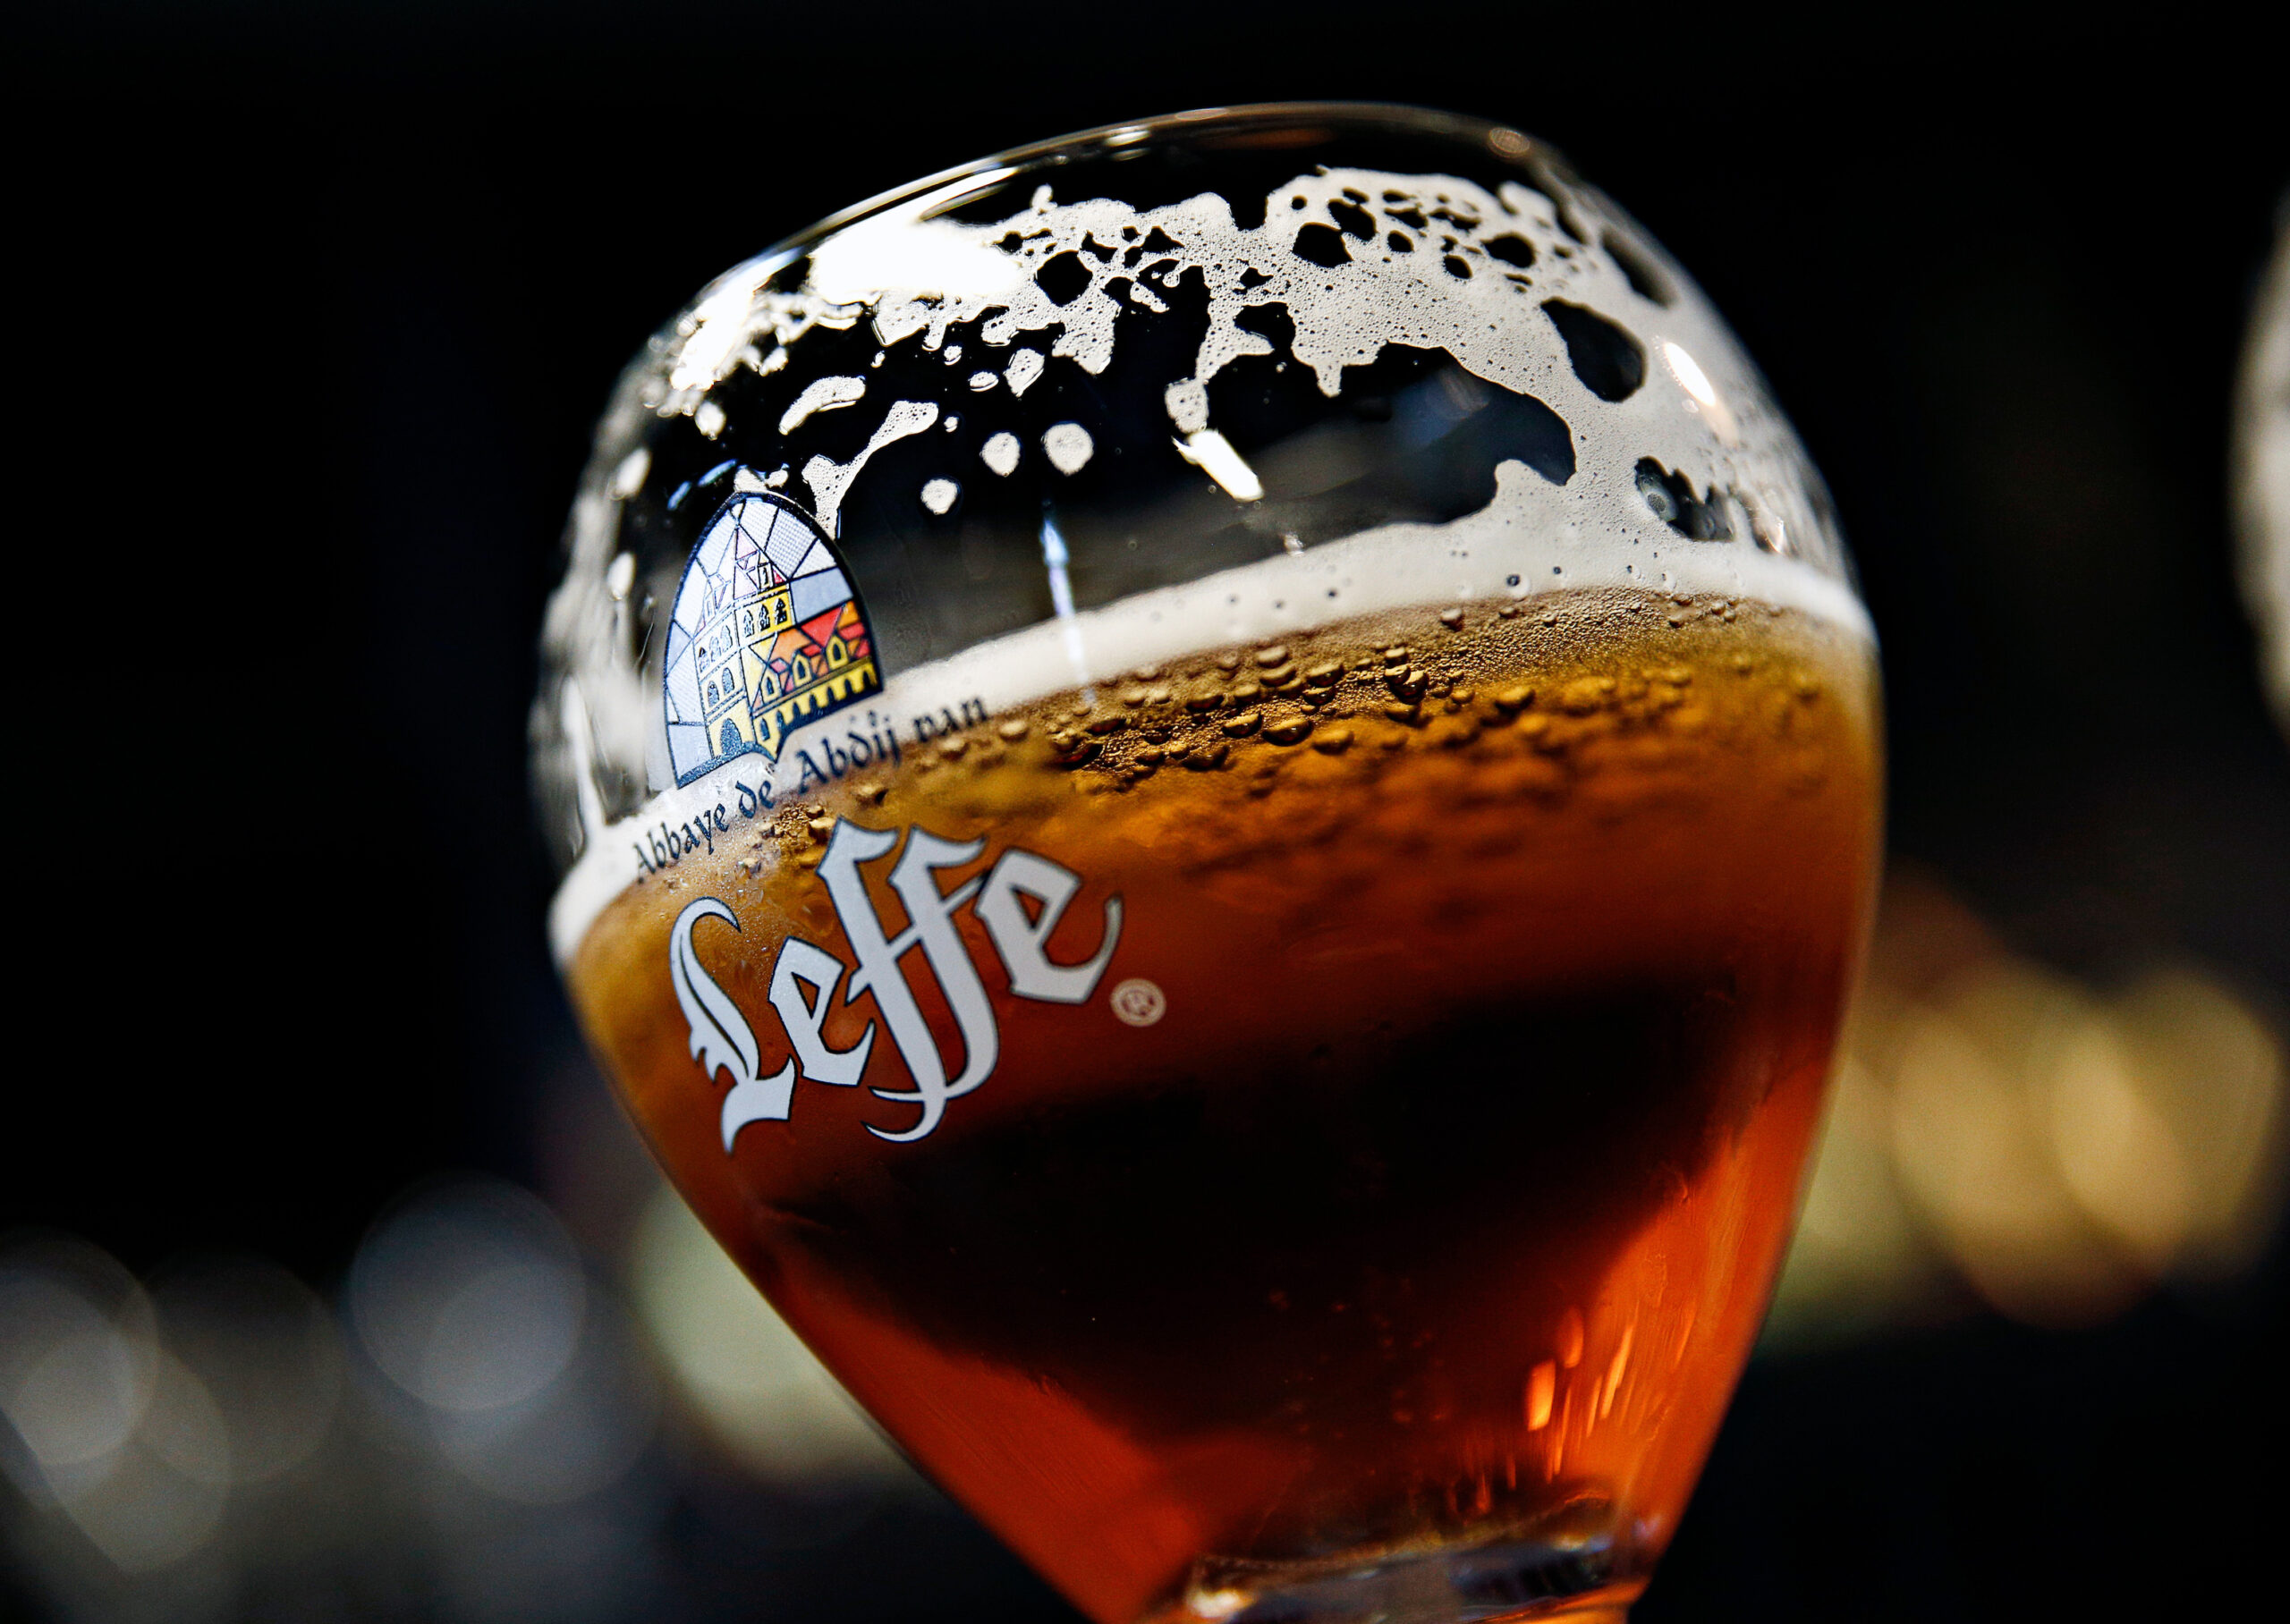 1 Limited Edition Glass for the Famous Abbey Beer Leffe, Leffe